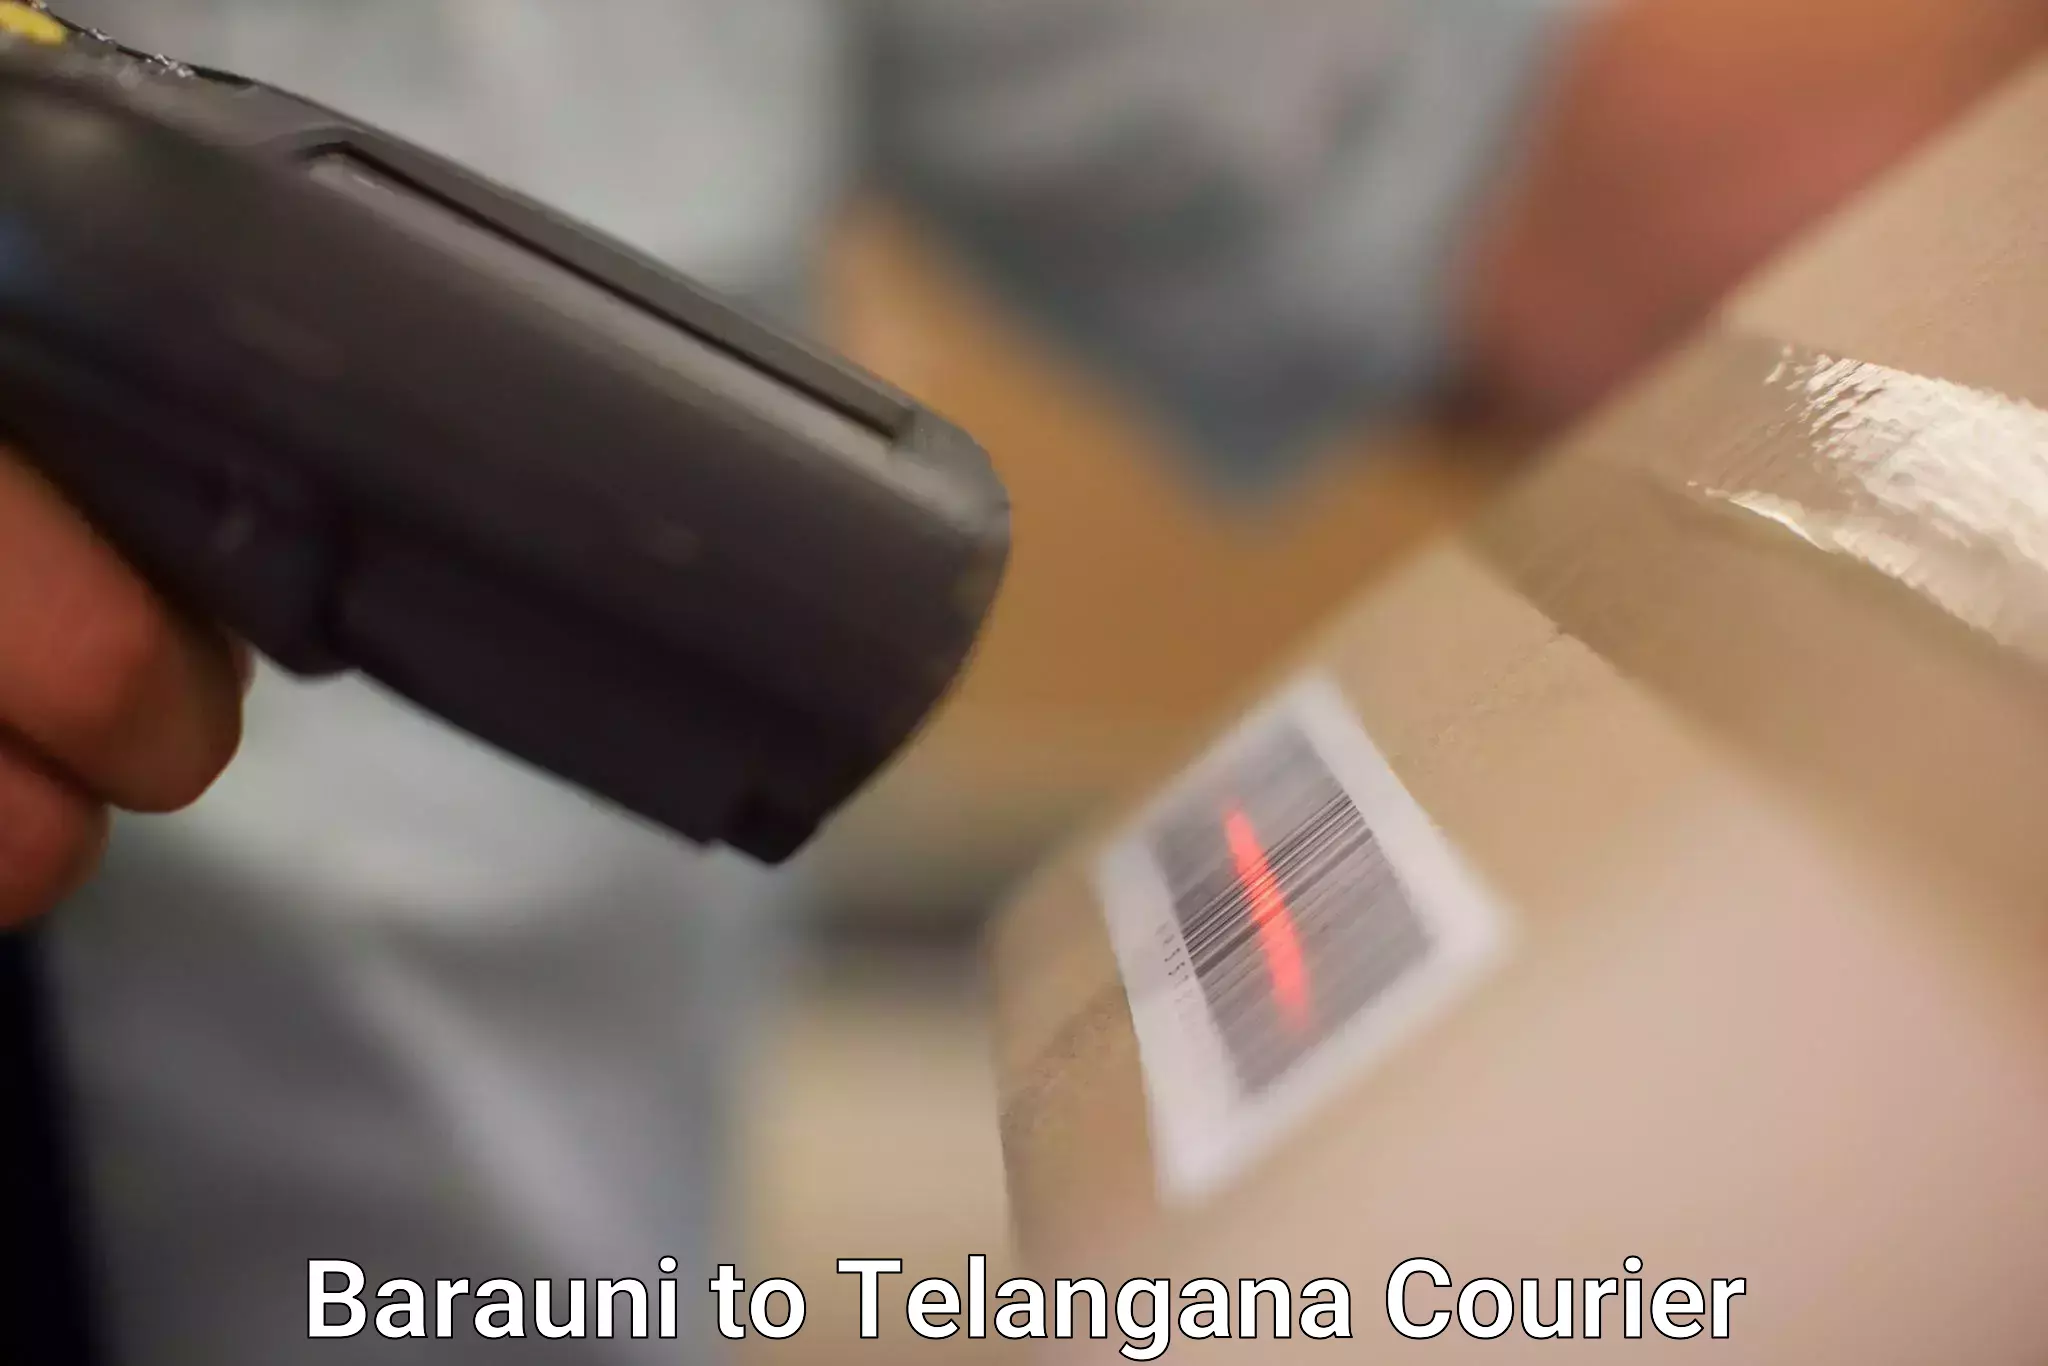 Package delivery network Barauni to Amangal